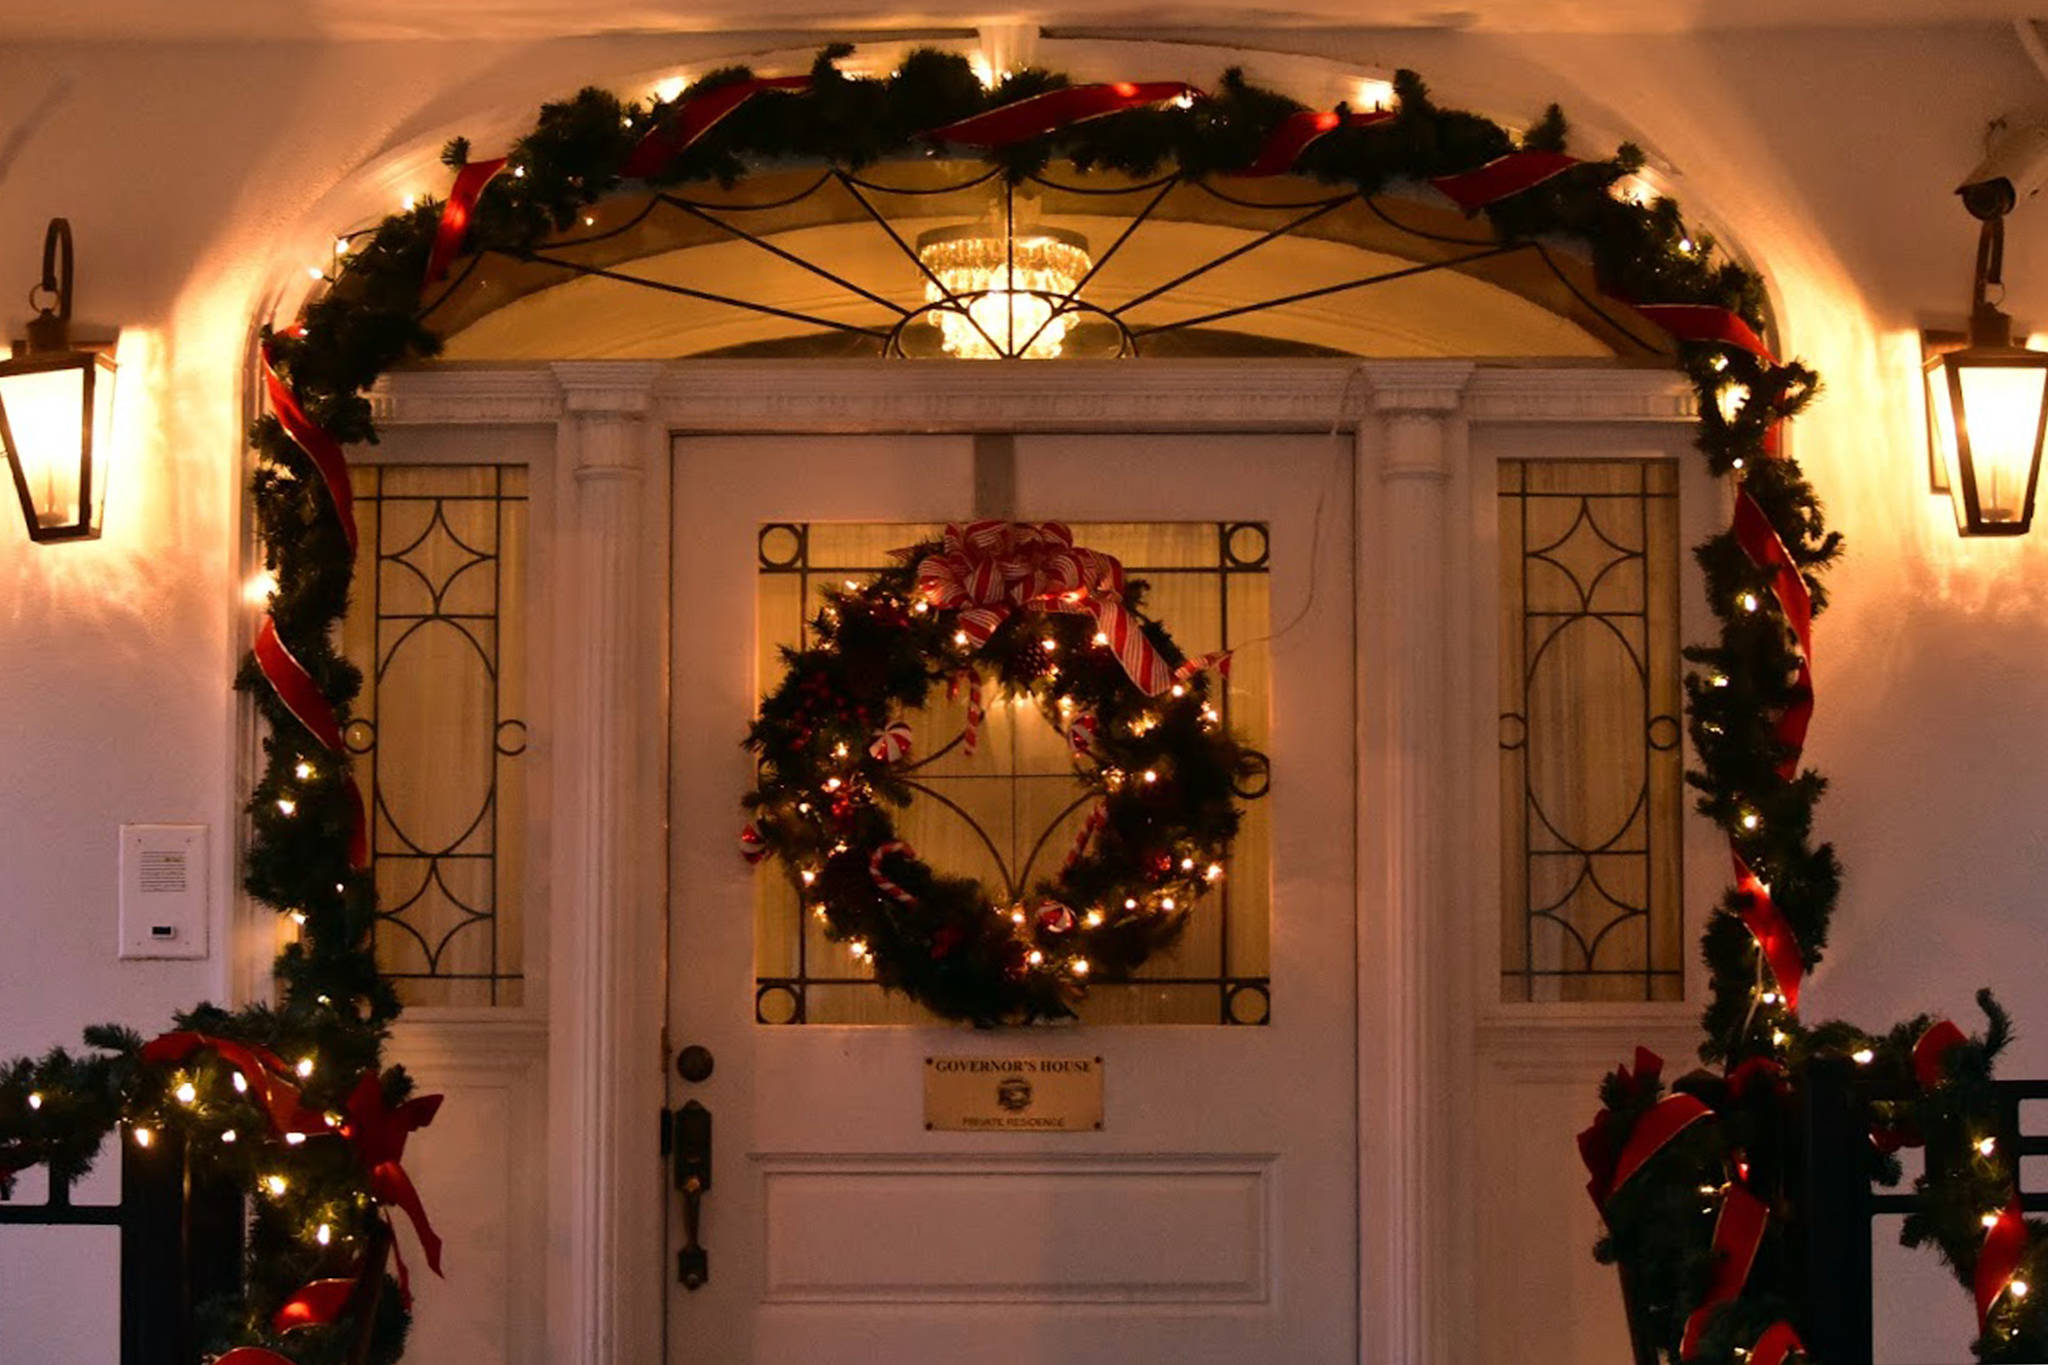 Peter Segall / Juneau Empire
A wreath hangs on the door of the Governor’s Mansion.